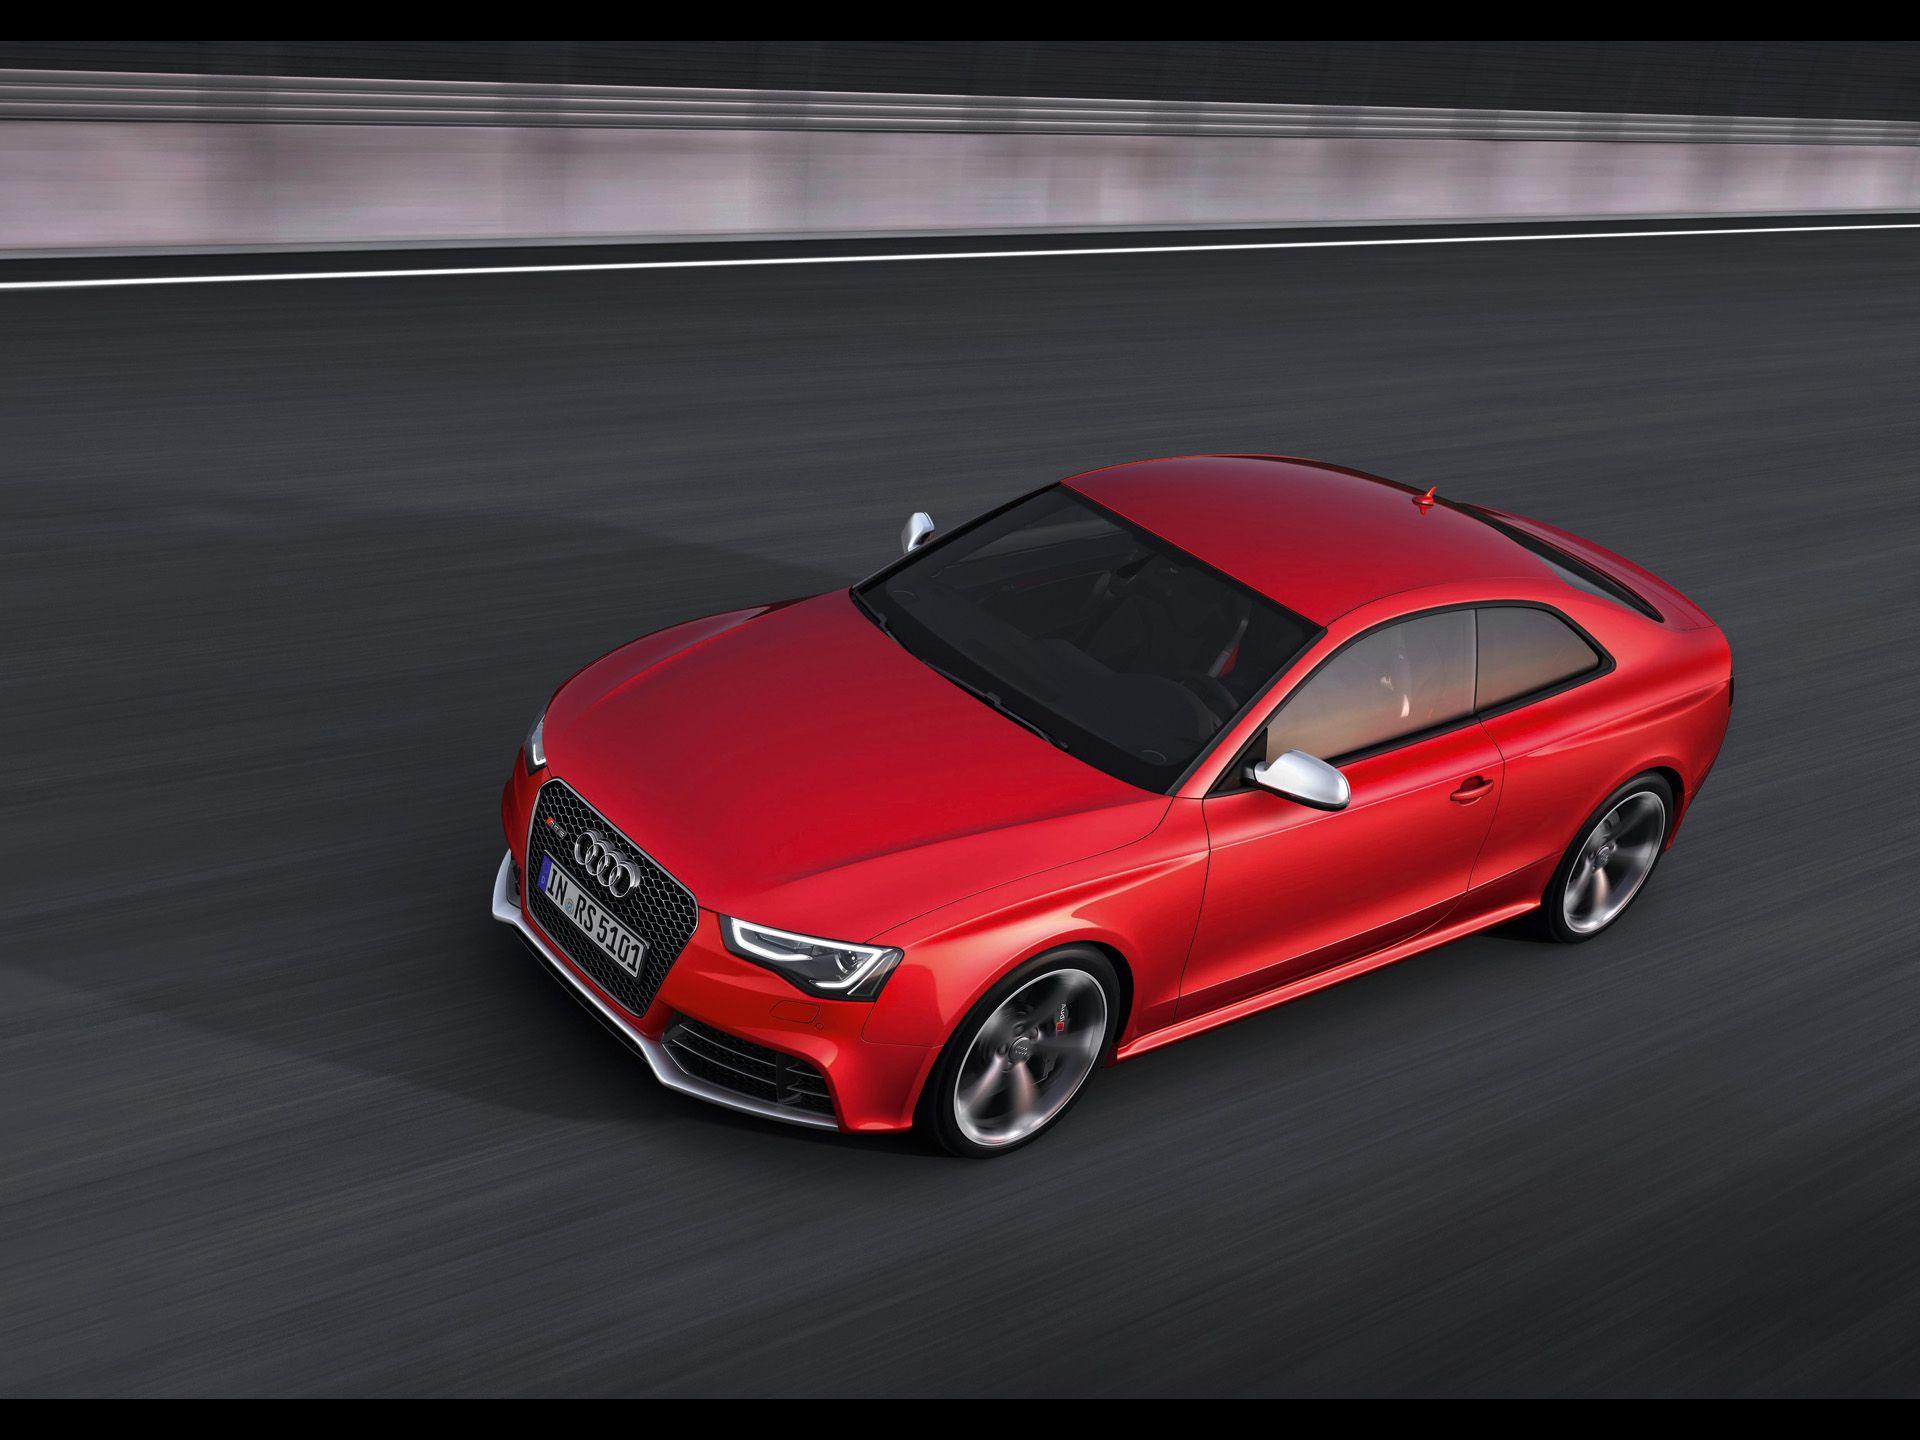 Audi RS5 Front and Side Speed wallpaper. Audi RS5 Front and Side